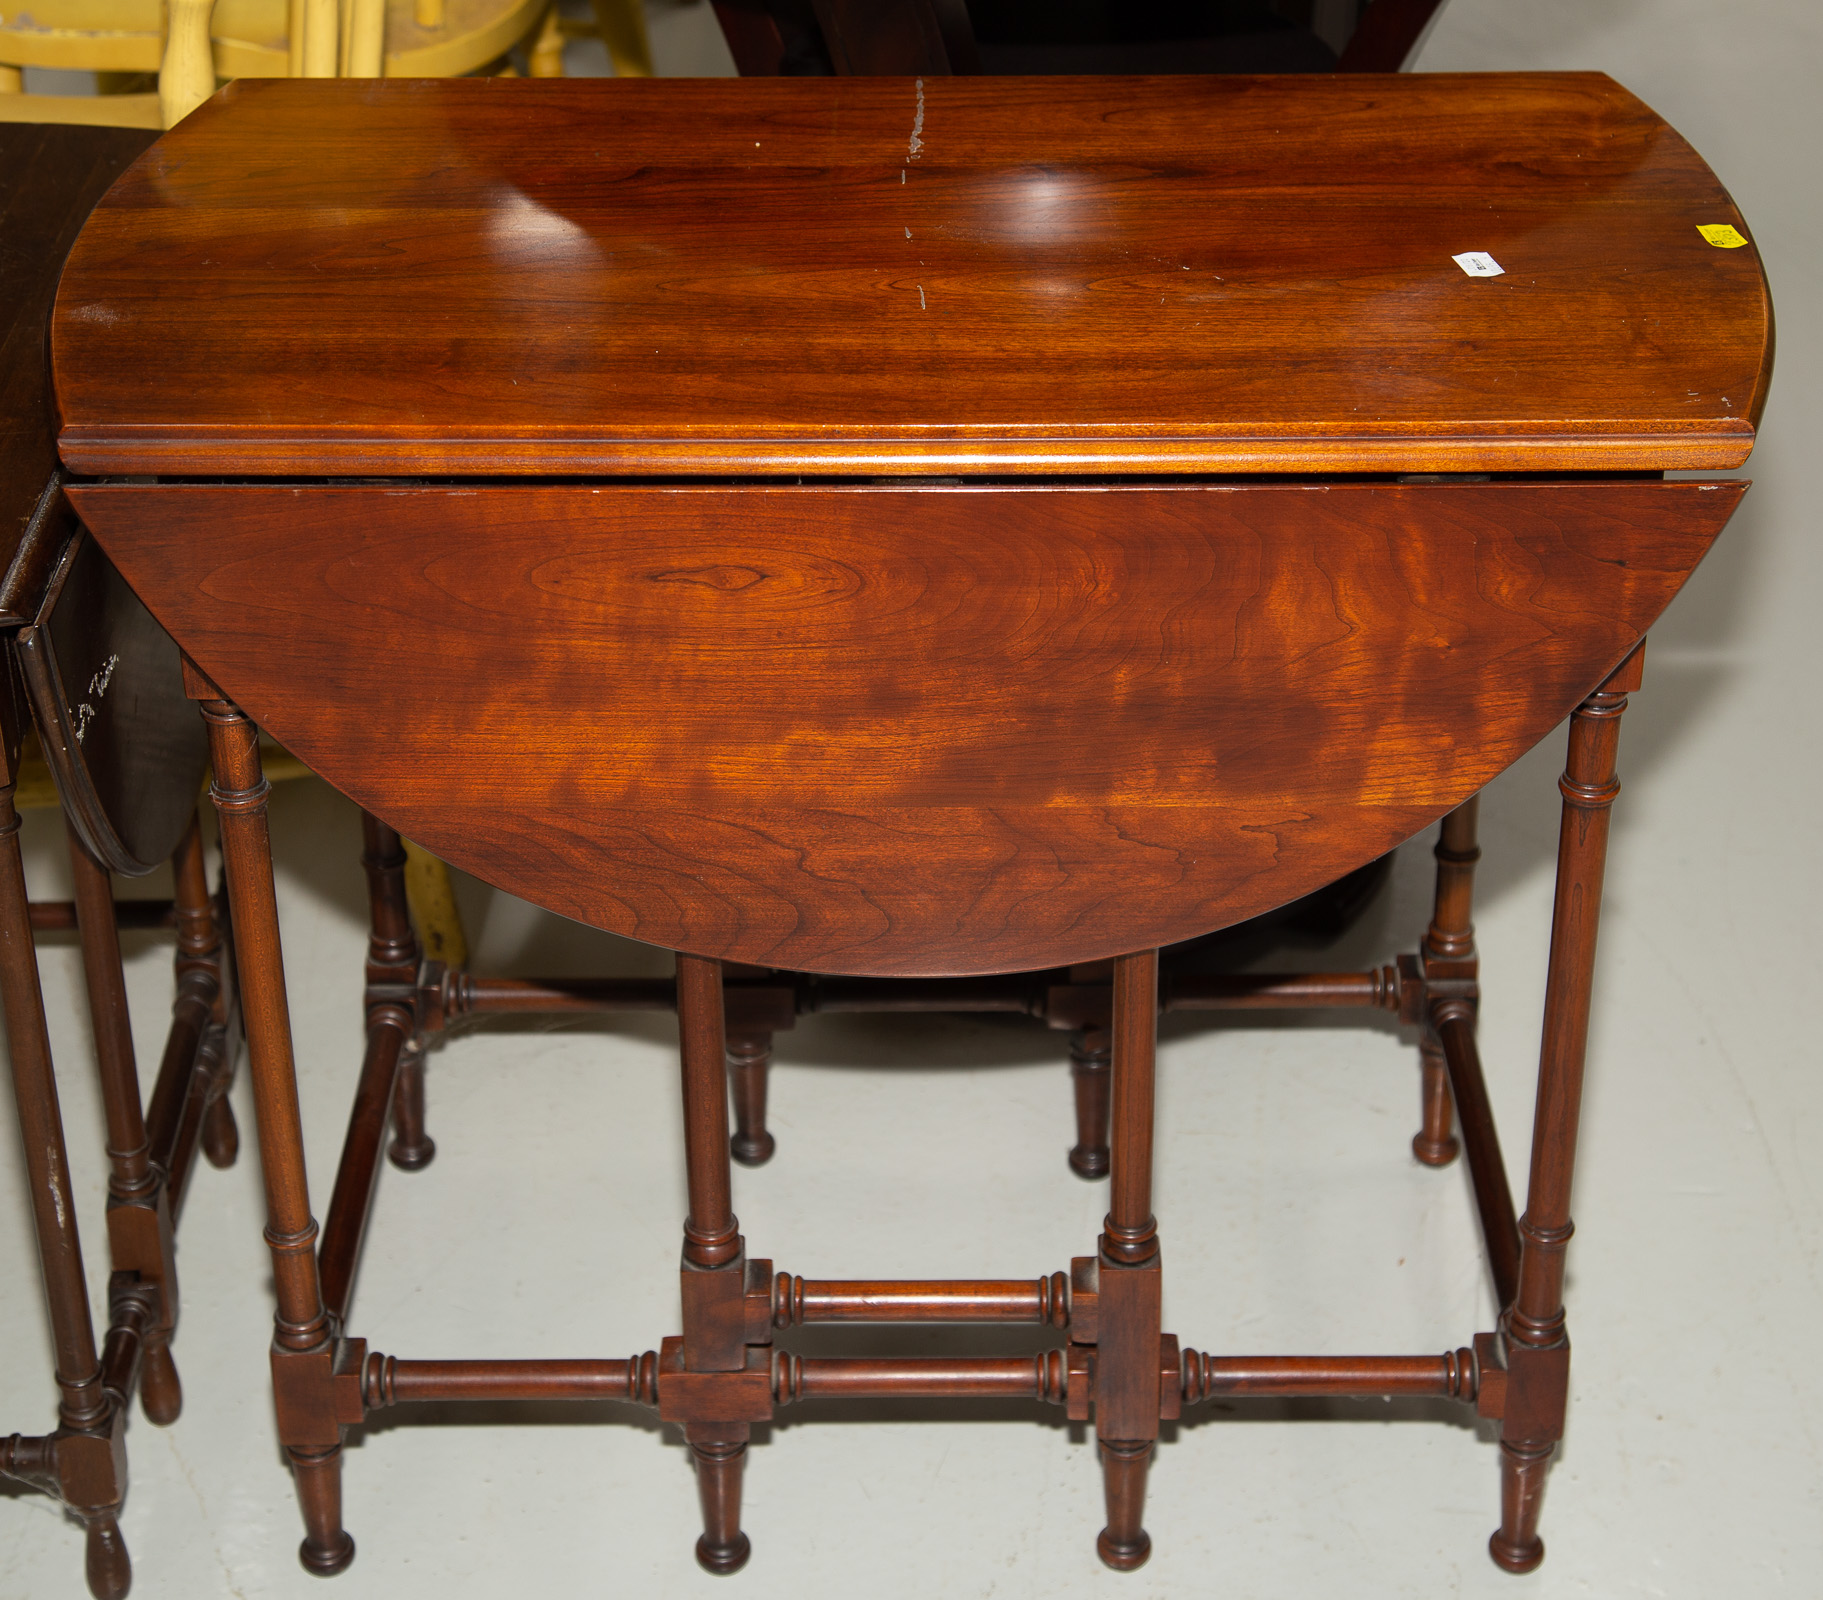 SMALL CHERRY DROP LEAF TABLE 3rd quarter,